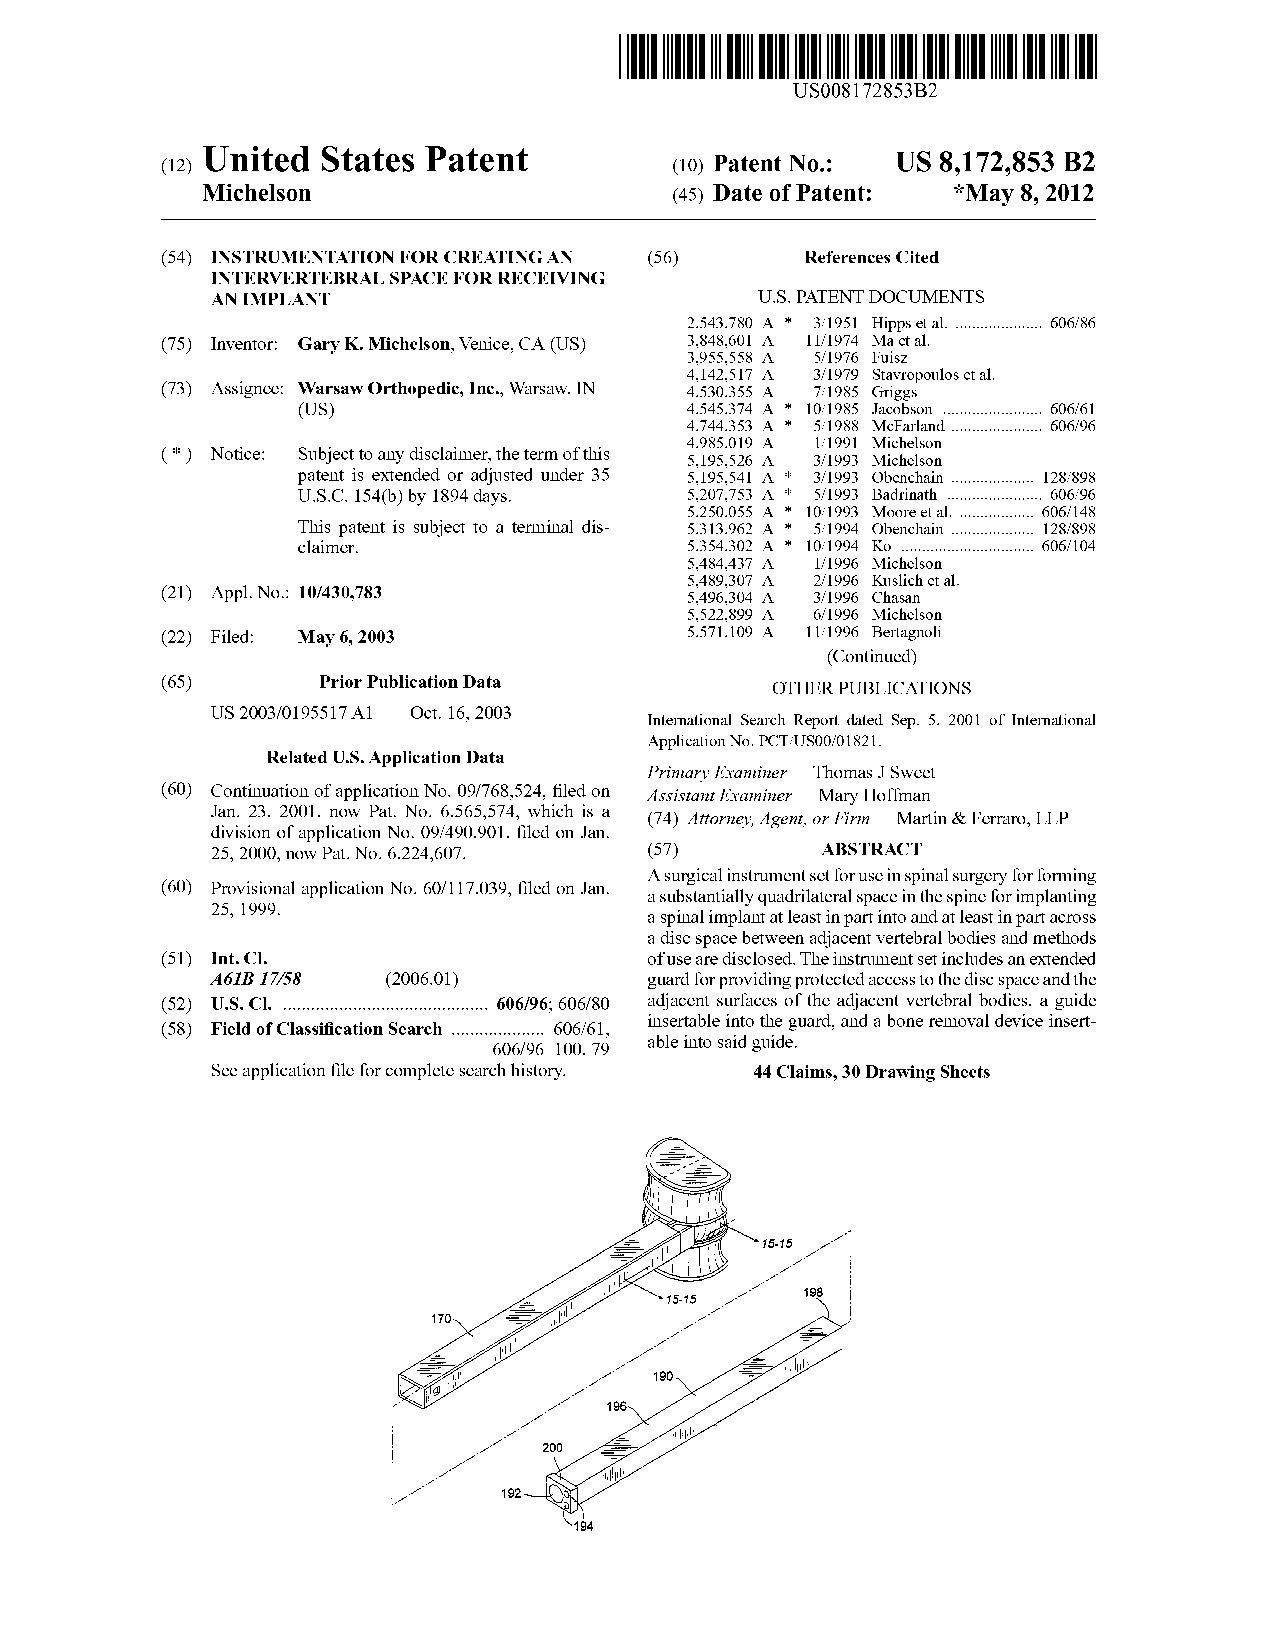 Instrumentation for creating an intervertebral space for receiving an     implant - Patent 8,172,853